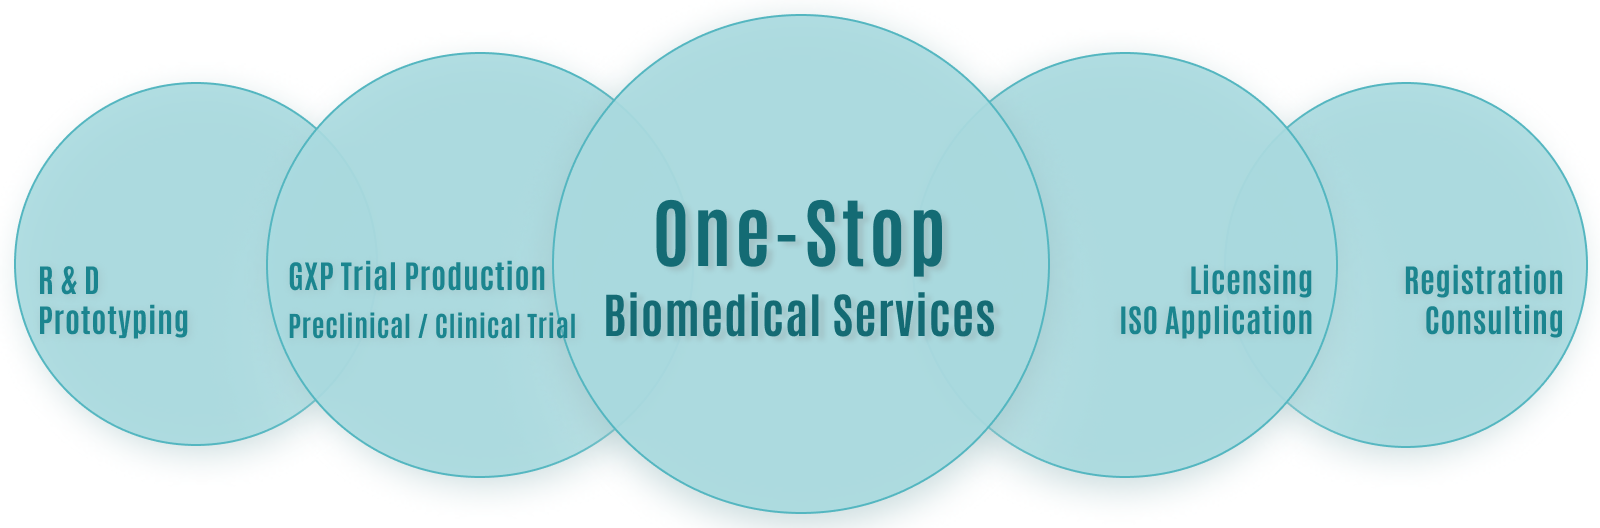 The one-stop biomedical services platform of ITRI.